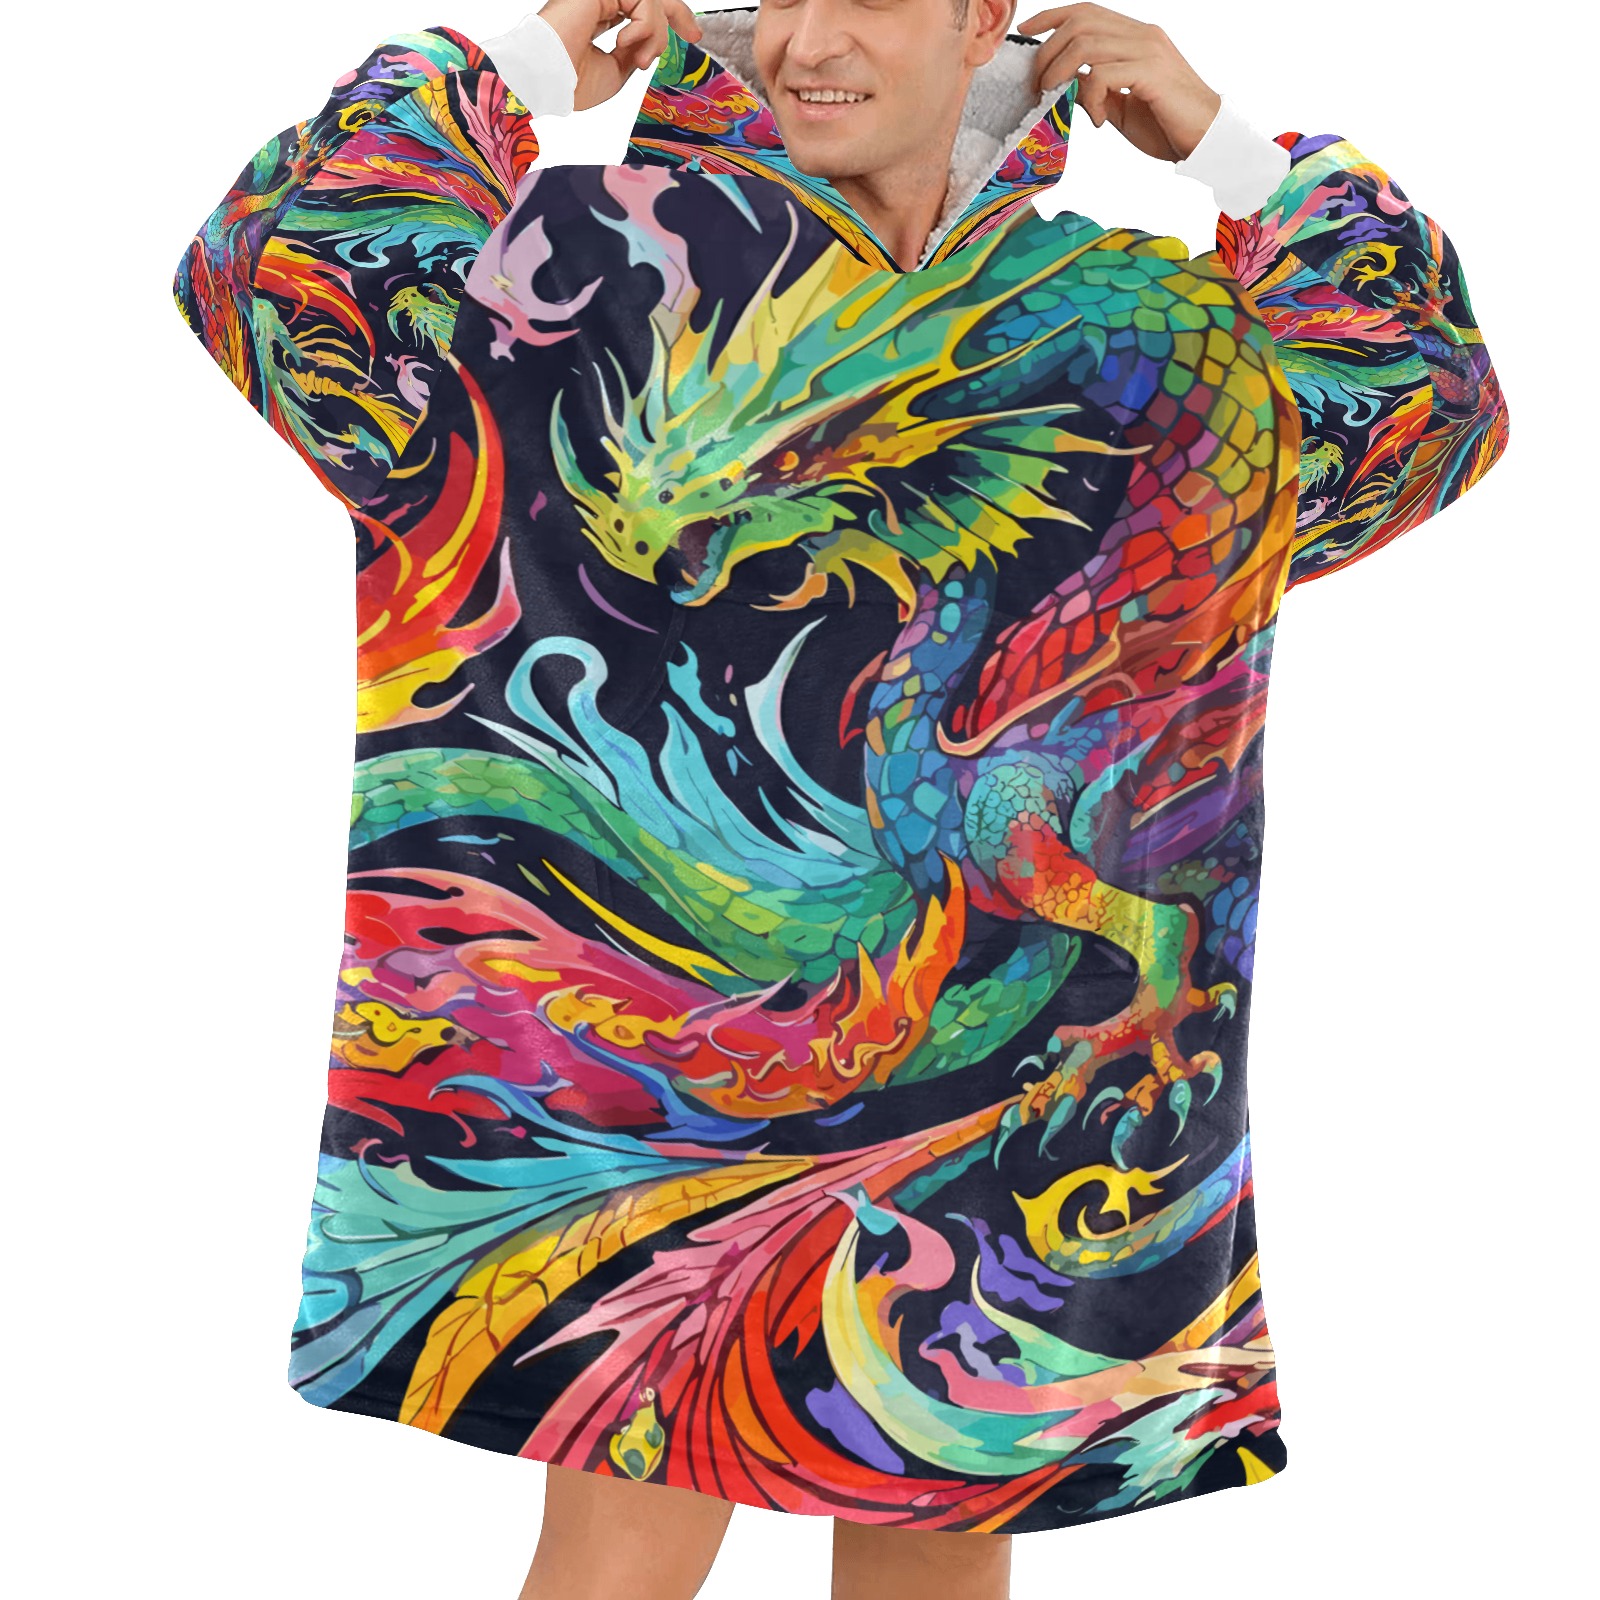 Awesome colorful abstract dragons, fire on black. Blanket Hoodie for Men